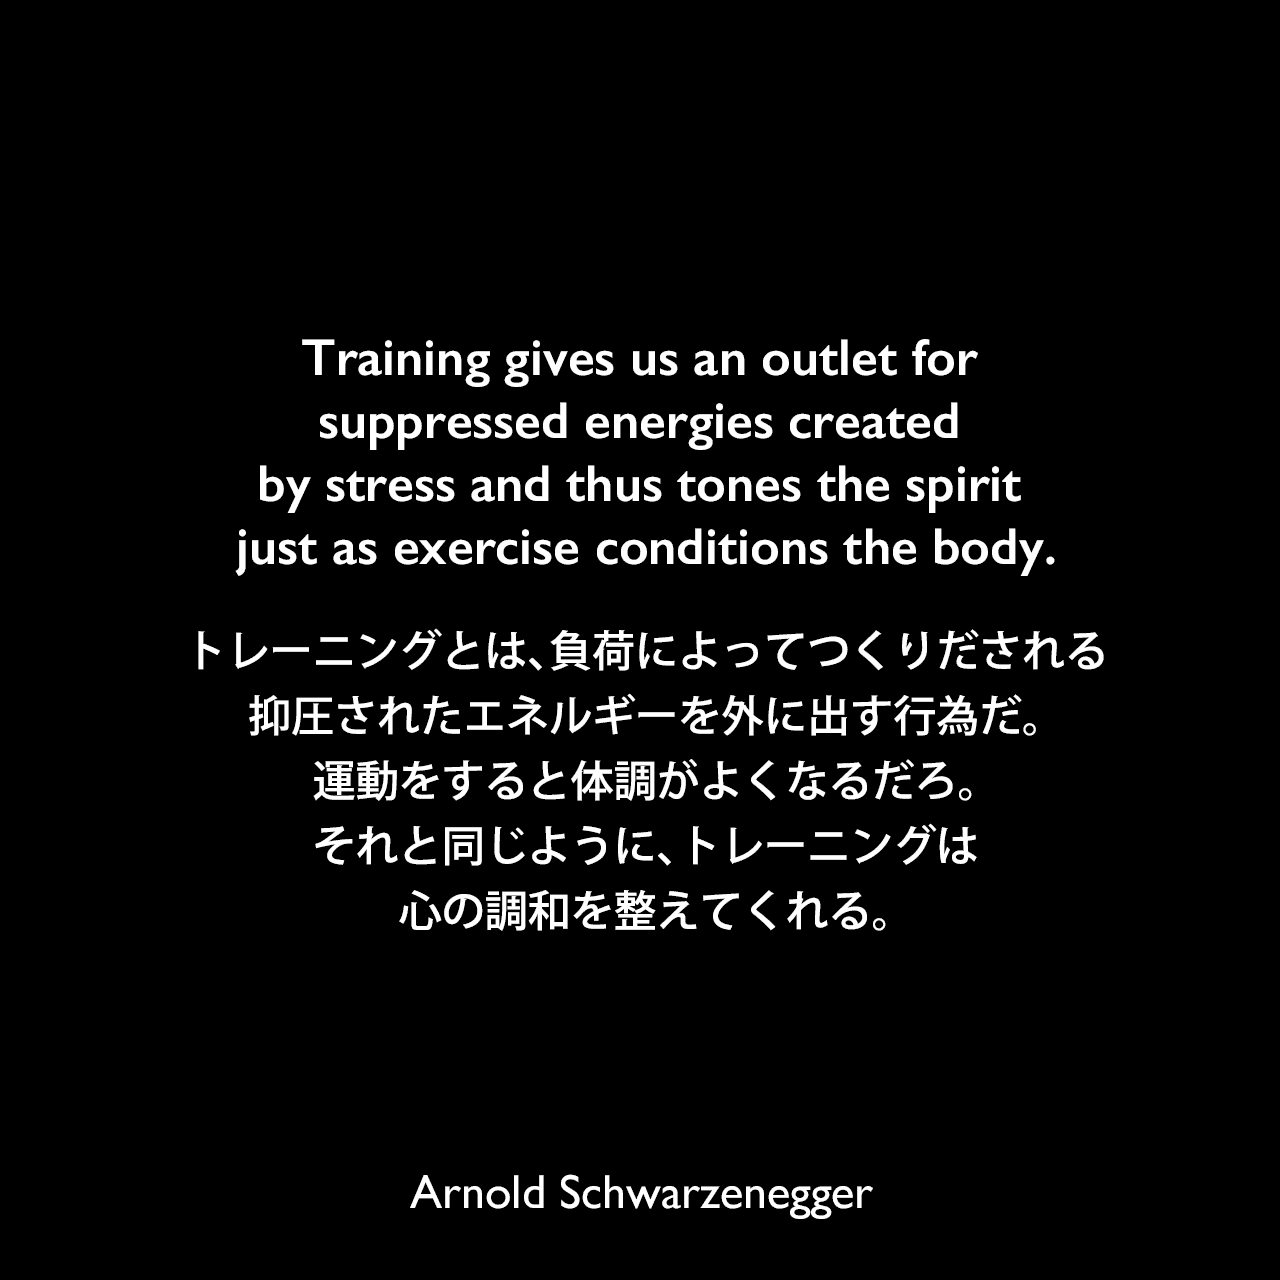 Training gives us an outlet for suppressed energies created by stress and thus tones the spirit just as exercise conditions the body.トレーニングとは、負荷によってつくりだされる抑圧されたエネルギーを外に出す行為だ。運動をすると体調がよくなるだろ。それと同じように、トレーニングは心の調和を整えてくれる。Arnold Schwarzenegger